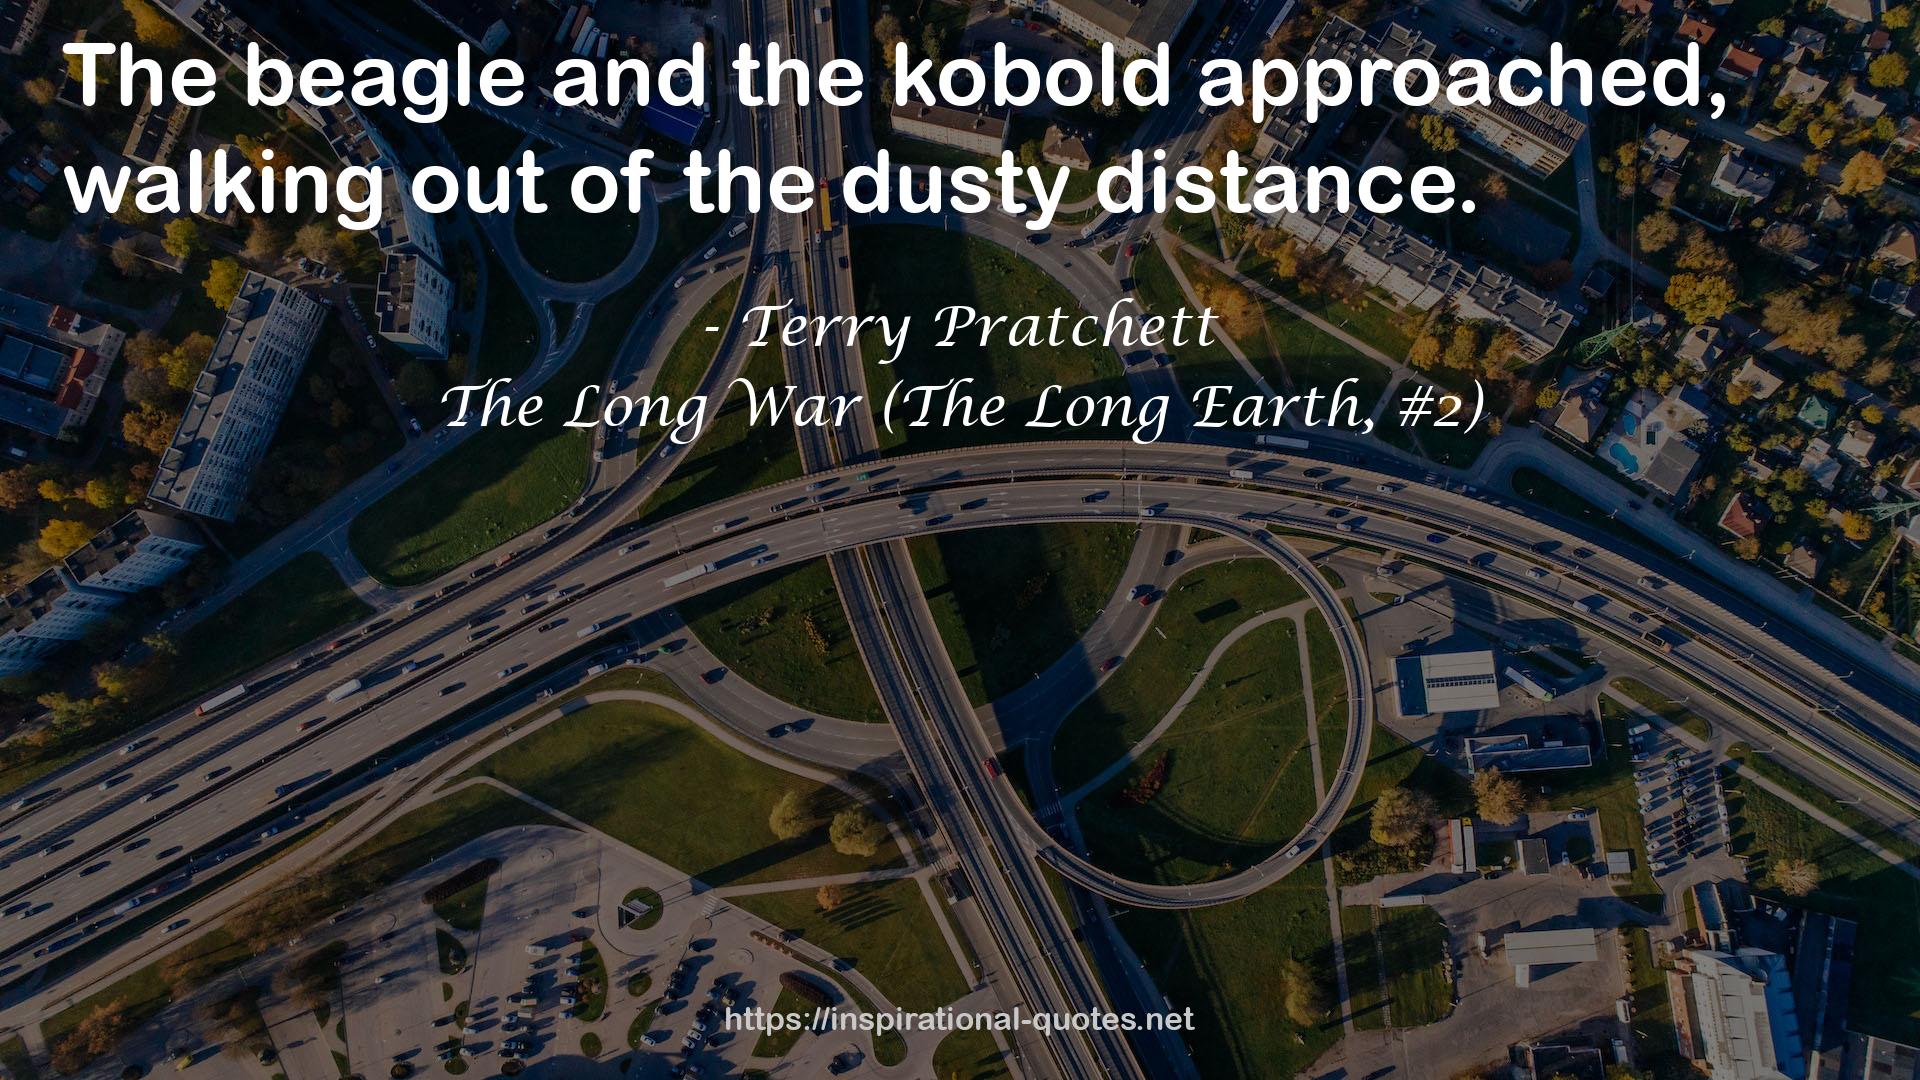 The Long War (The Long Earth, #2) QUOTES